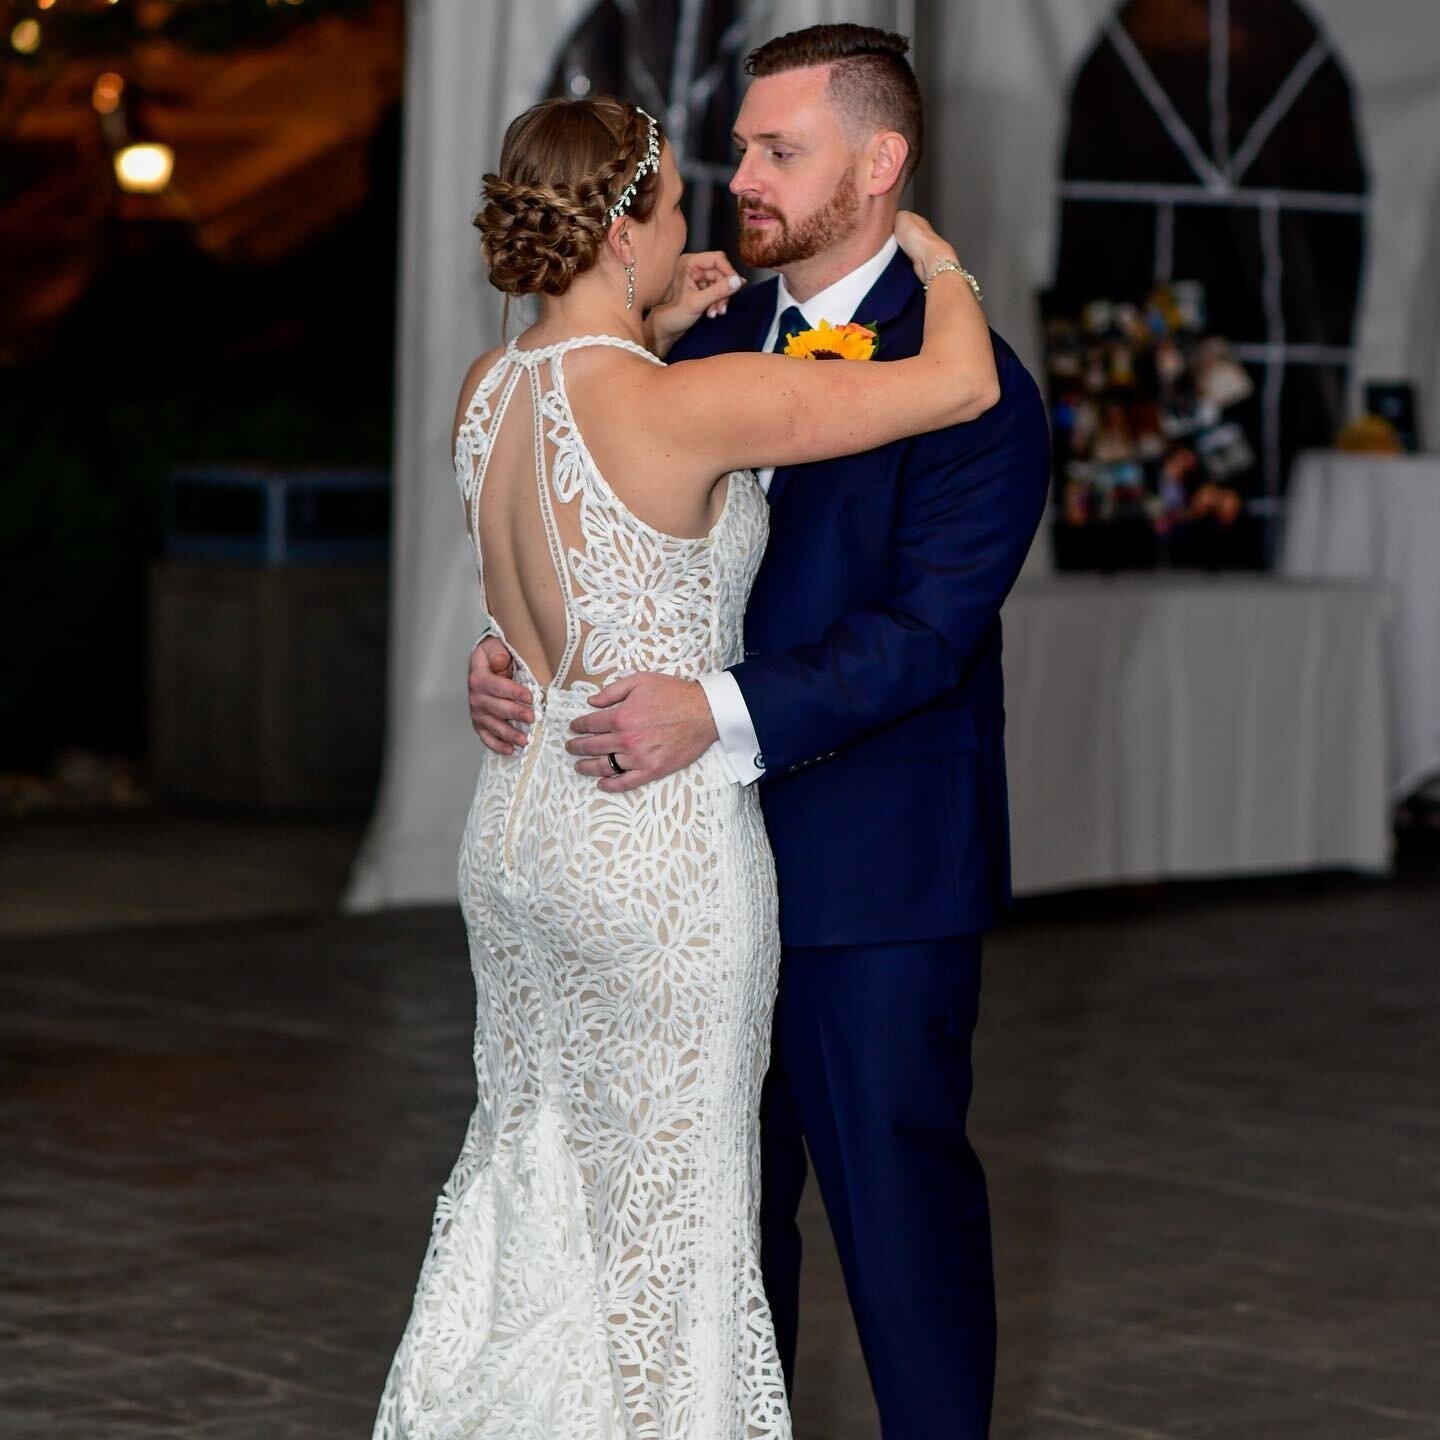 It's all about that flawless open back on our bride @meglegs38!  People will spend a lot of time staring at your back and we'll get you the perfect fit for every curve.⁠
⁠
📷: @maiyasaissa and @thefetchstudio ⁠